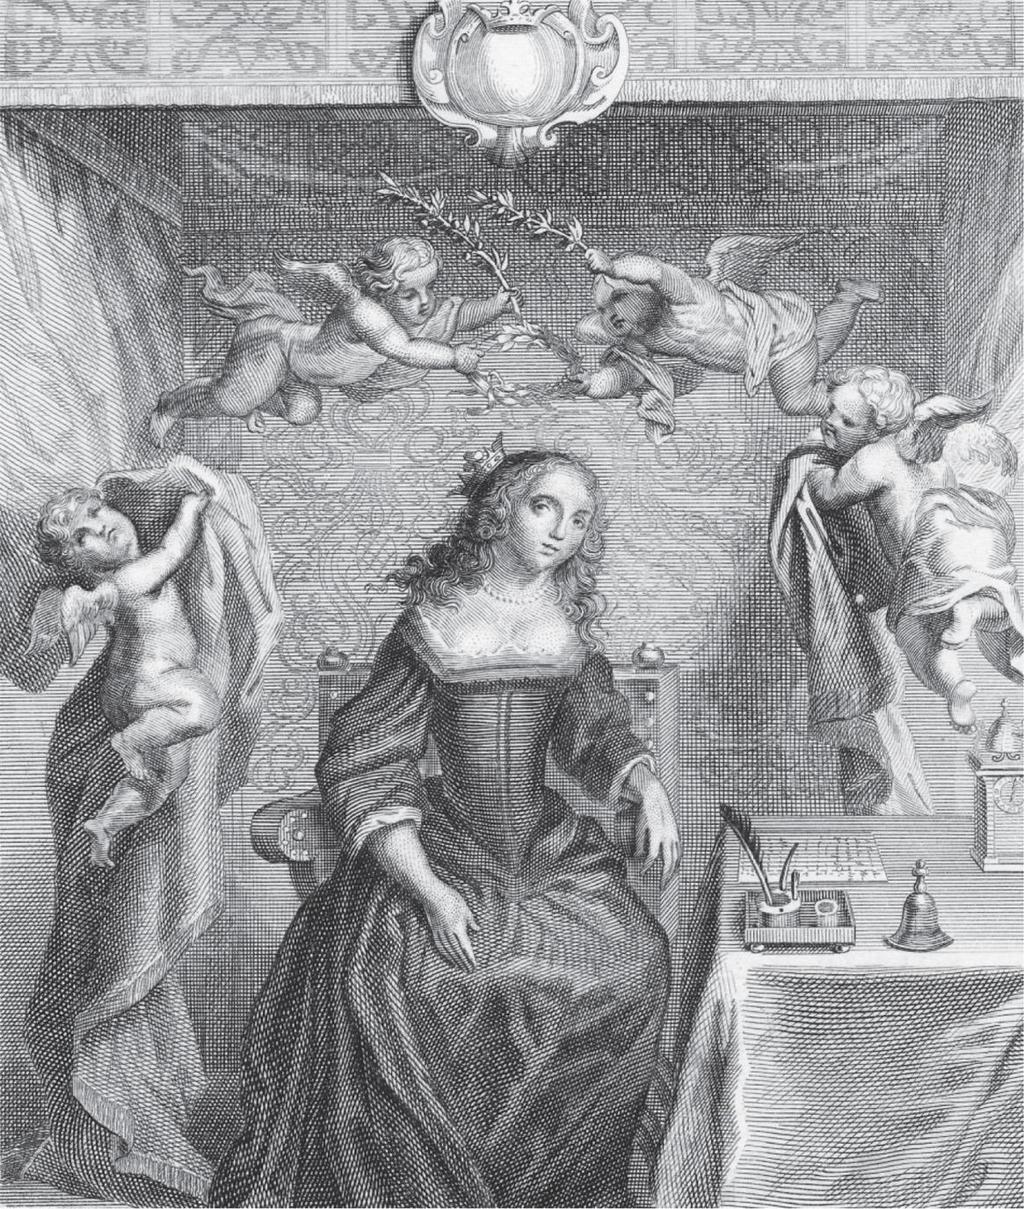 Margaret Cavendish, who wrote widely on scientific subjects, was the most accomplished woman